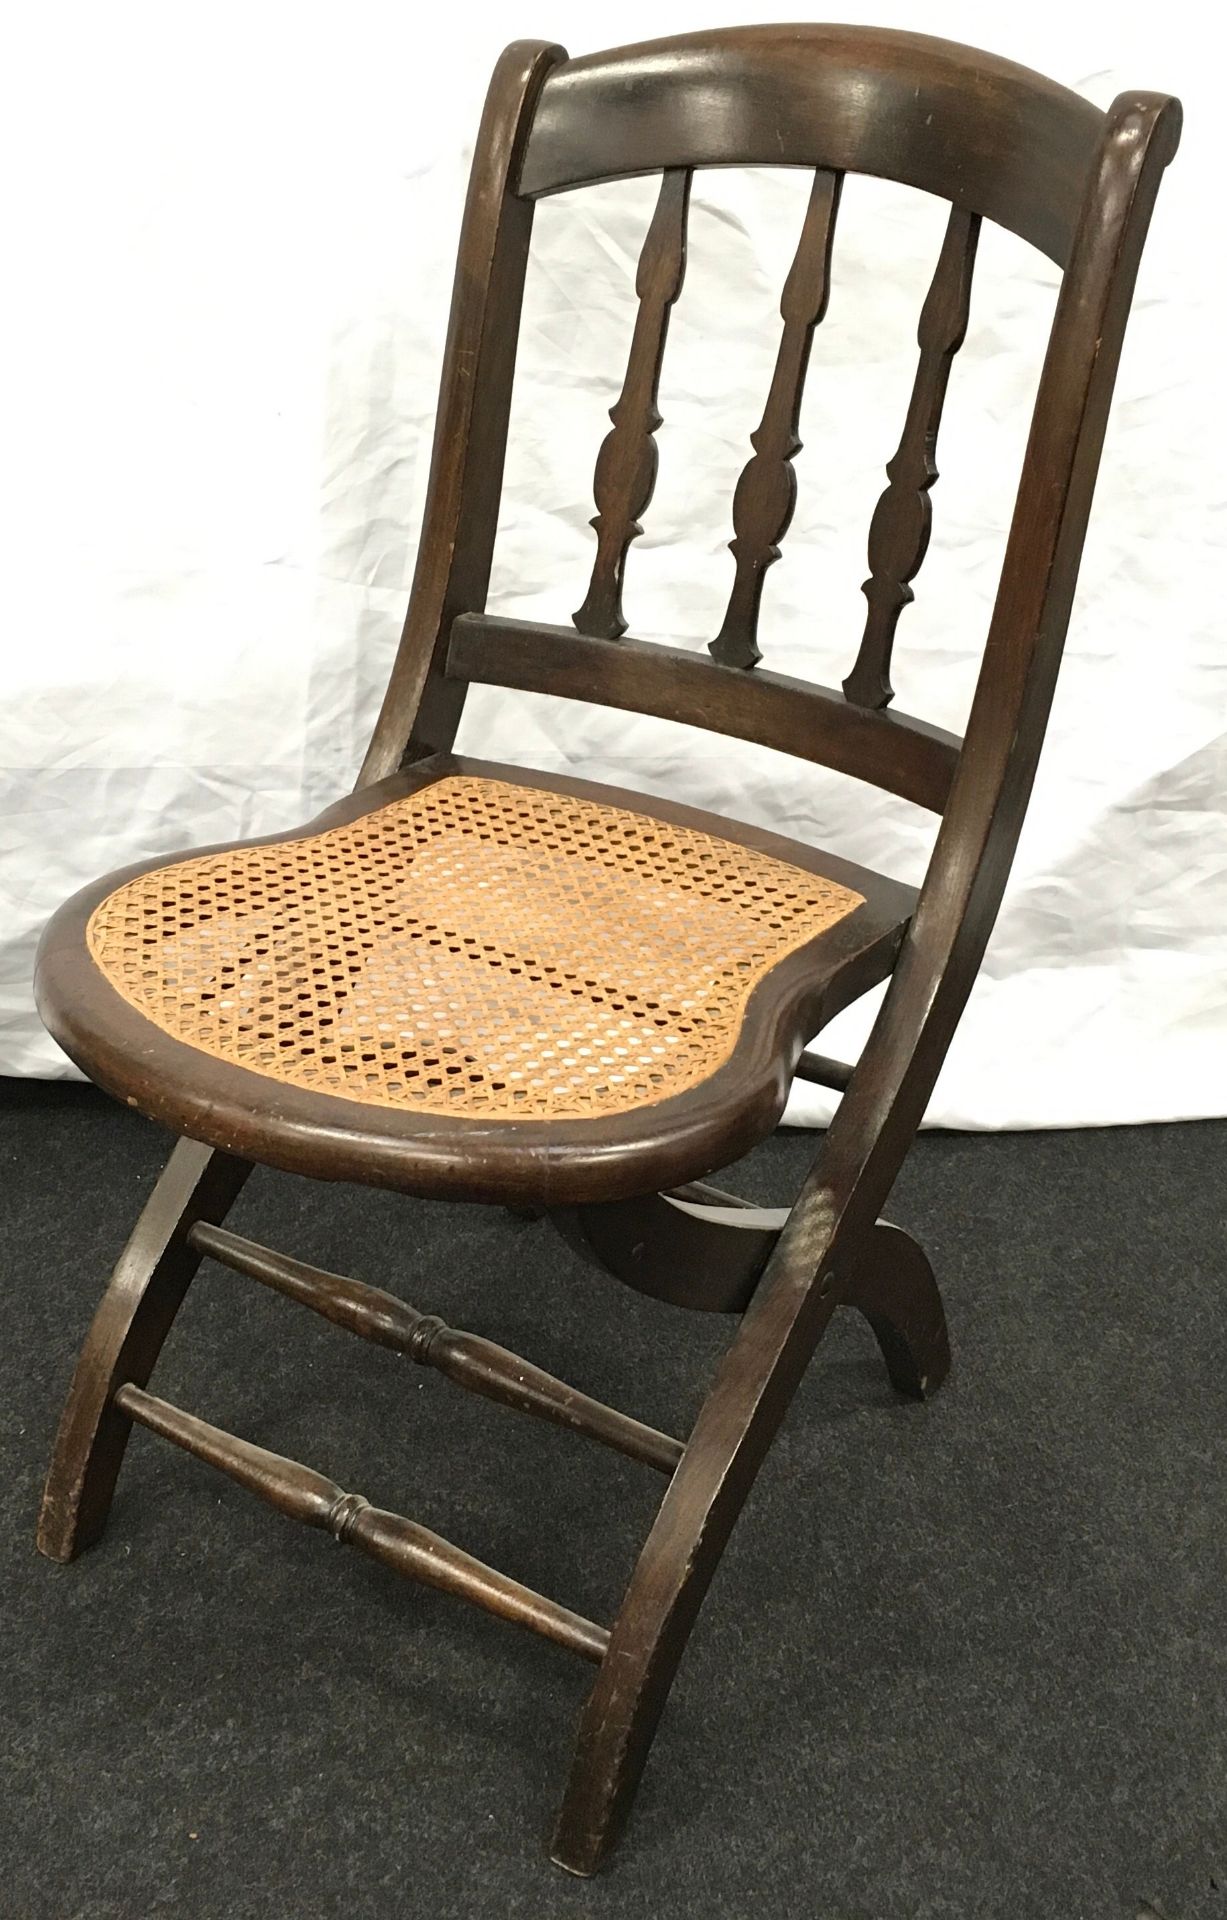 Vintage mahogany folding chair with rattan seat in good order